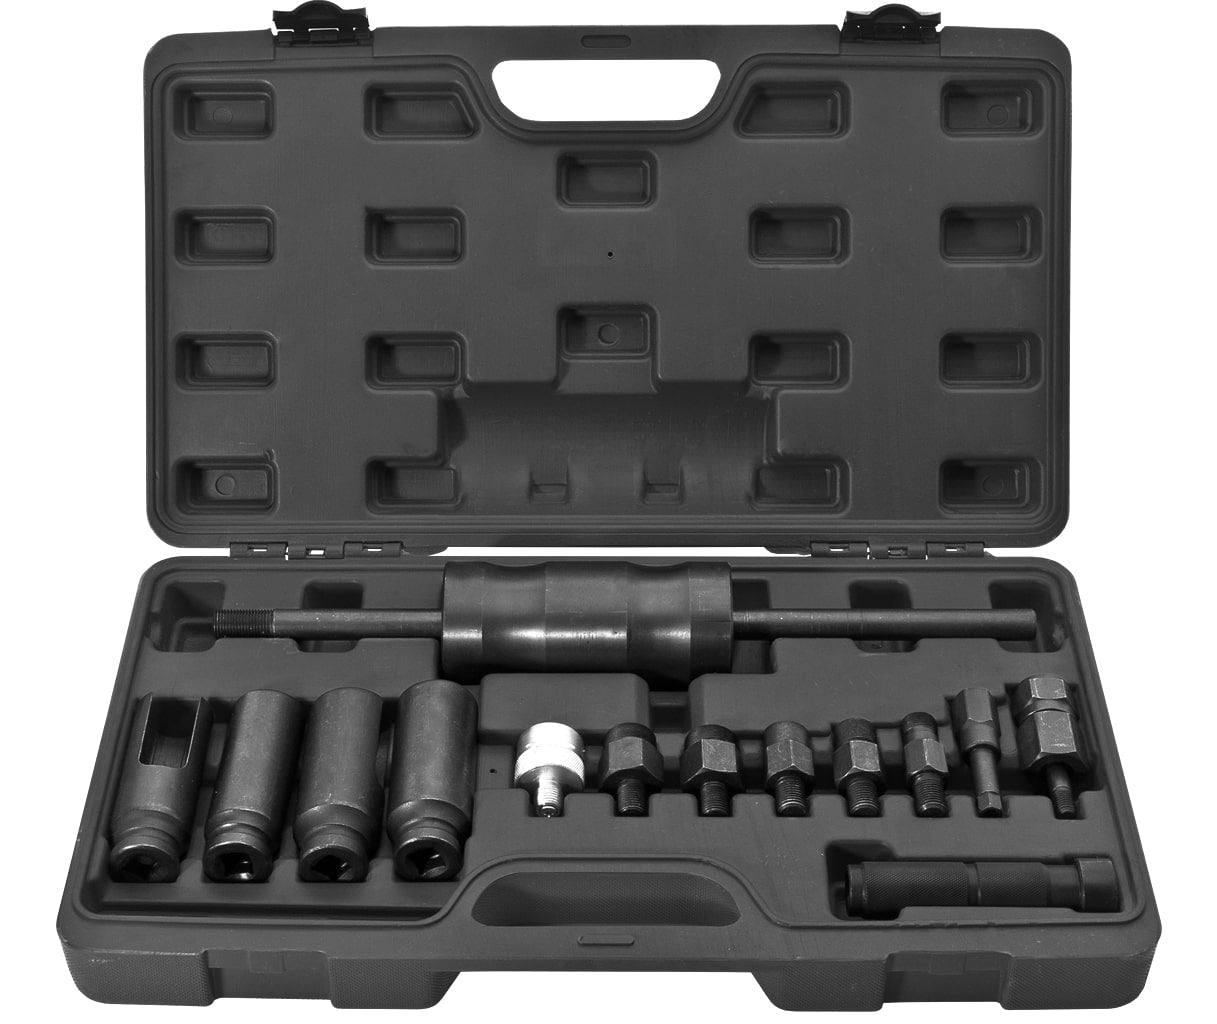 Diesel Injector Extractor & Common Rail Puller Kit 14Pce + Slide Hammer - SP66082 by SP Tools